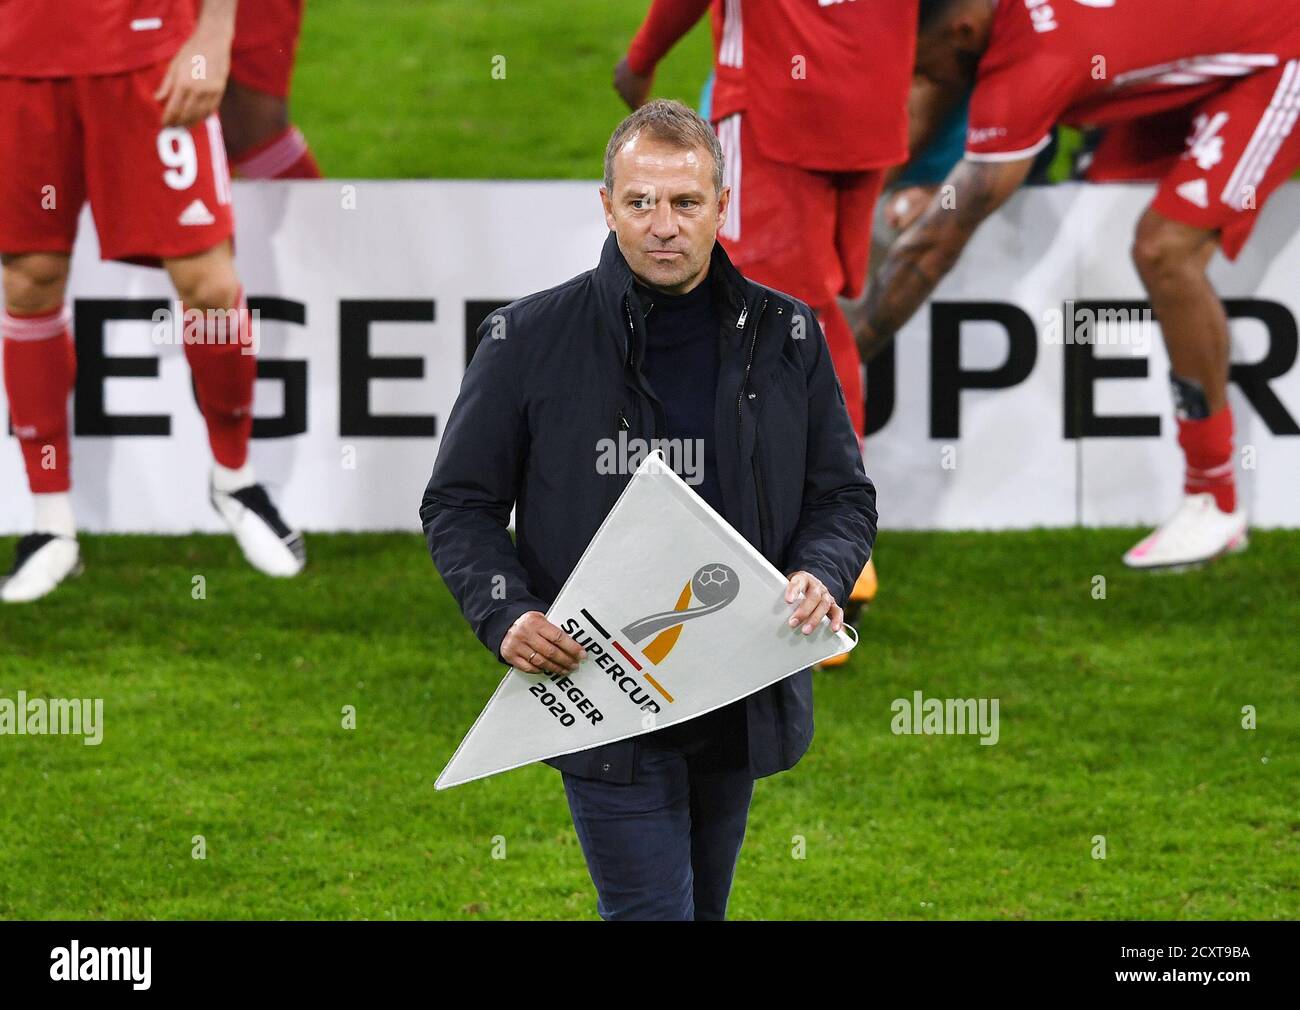 Allianz Arena Munich Germany 30.09.20, Football: German SUPERCUP FINALE 2020/2021, FC Bayern Muenchen (FCB, red) vs Borussia Dortmund  (BVB, yellow) 3:2 — manager  Hansi Flick (FCB) with Supercup pennant   Foto: Markus Ulmer/Pressefoto Ulmer/Pool/via Kolvenbach  DFL regulations prohibit any use of photographs as image sequences and/or quasi-video. Stock Photo